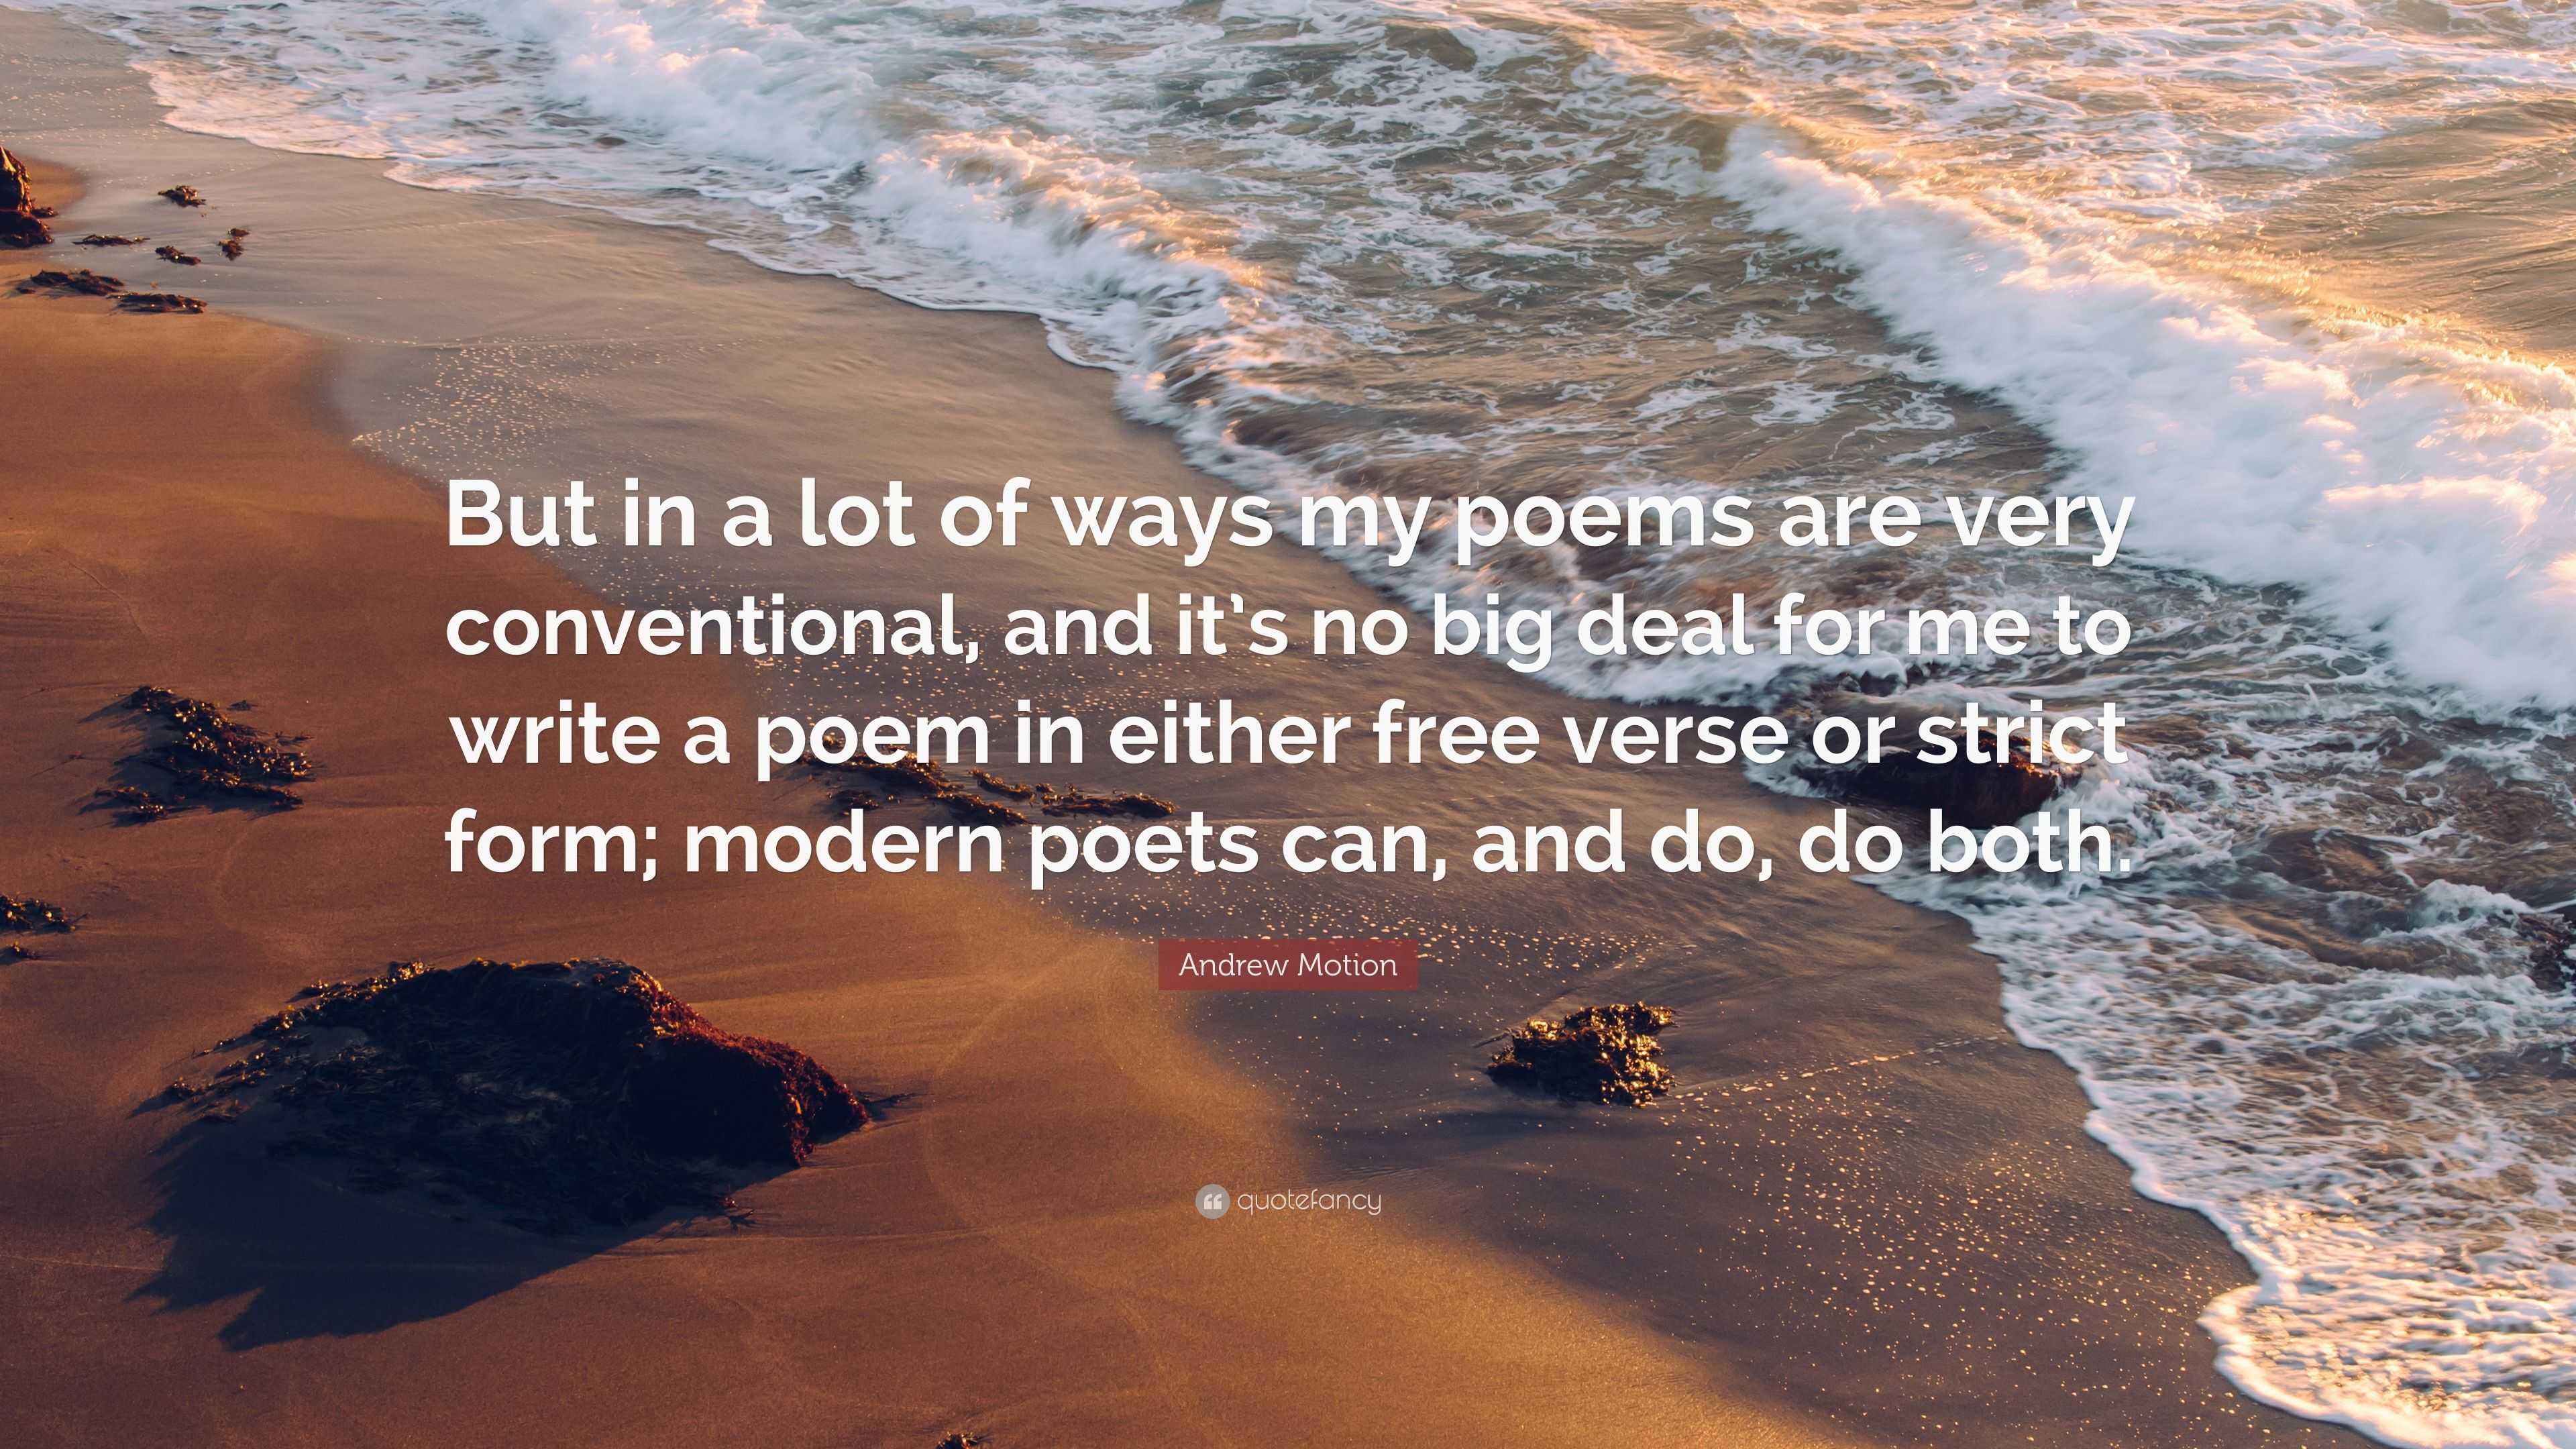 Andrew Motion Quote: “But in a lot of ways my poems are very